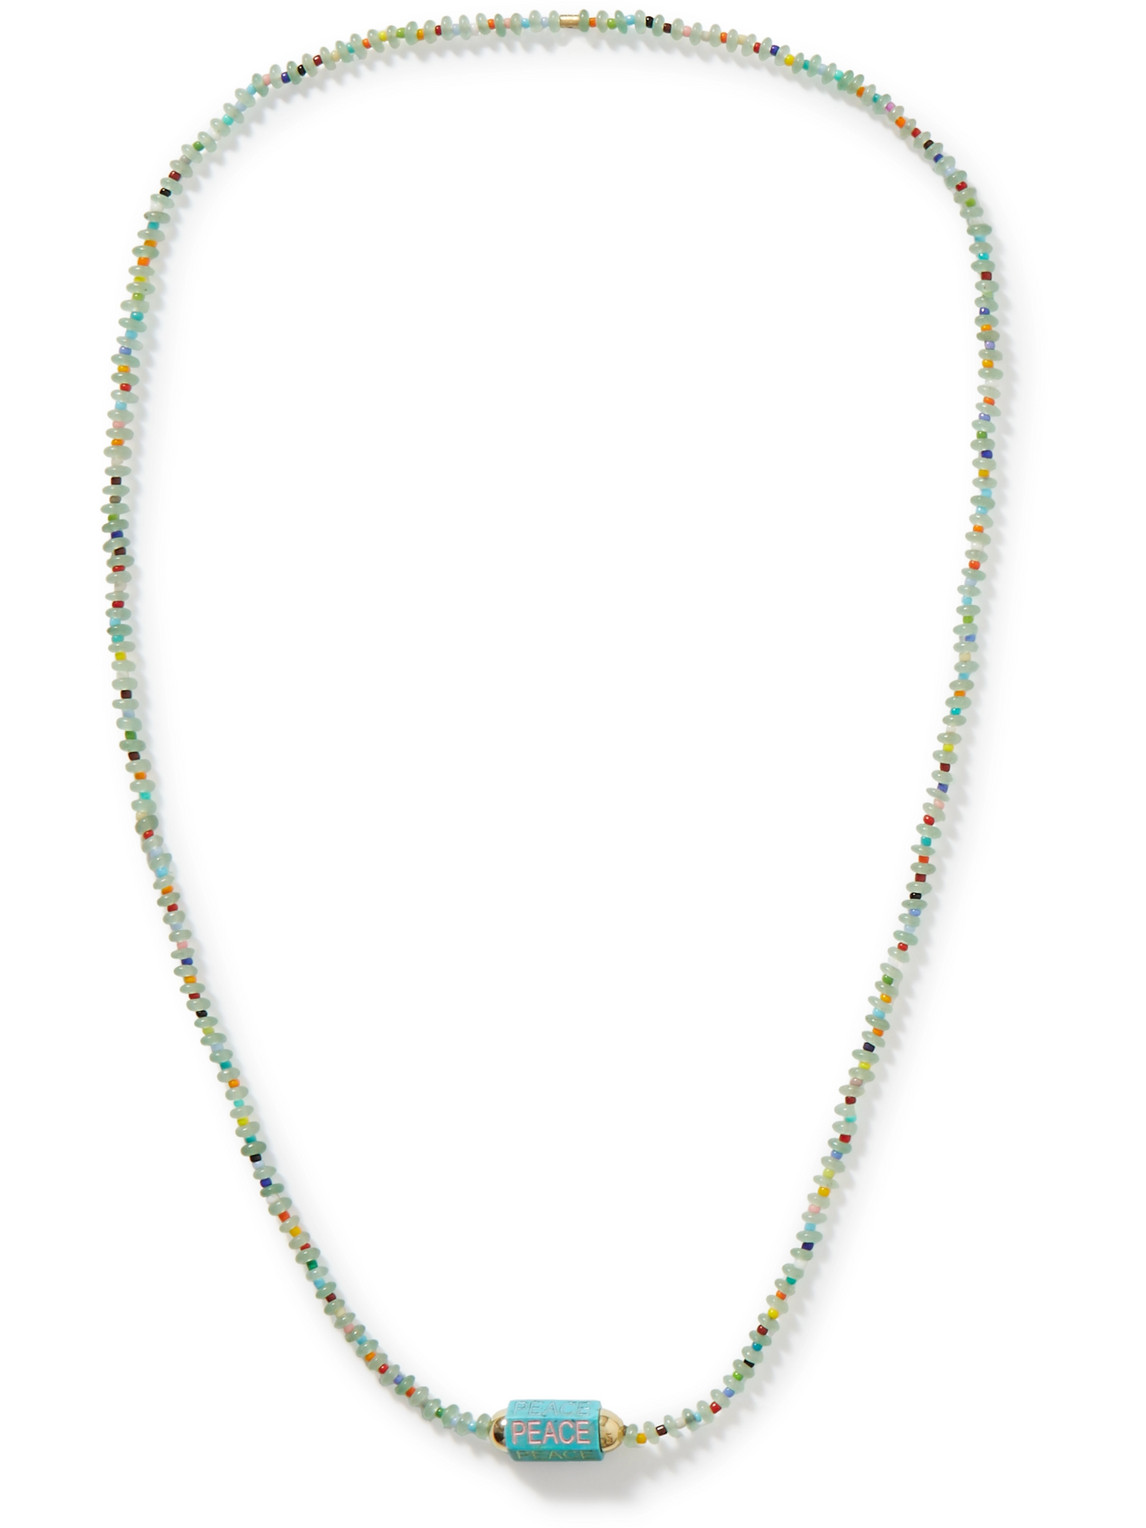 Gold, Turquoise, Enamel and Glass Beaded Necklace